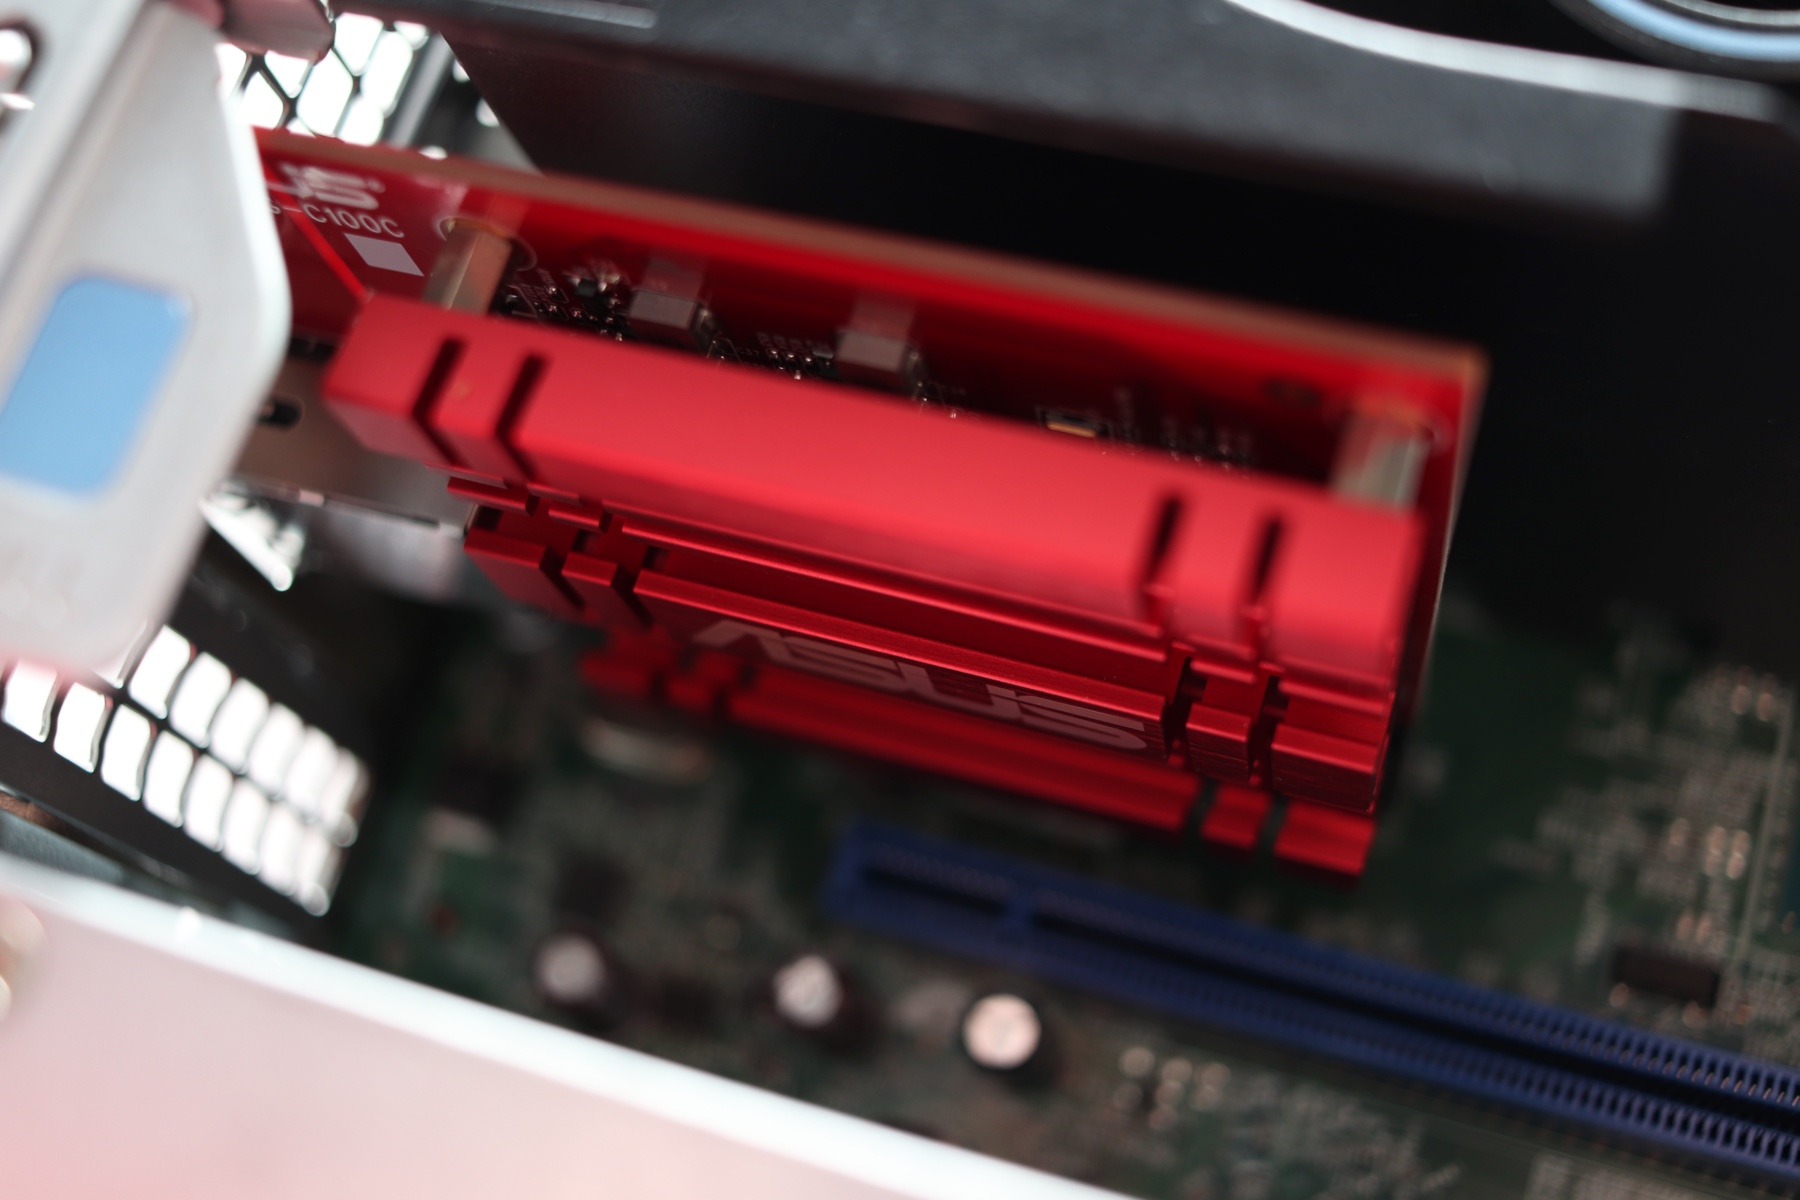 Asus 10 gigabit ethernet card with a red PCB and a red aluminum heatsing, in its PCIe slot.